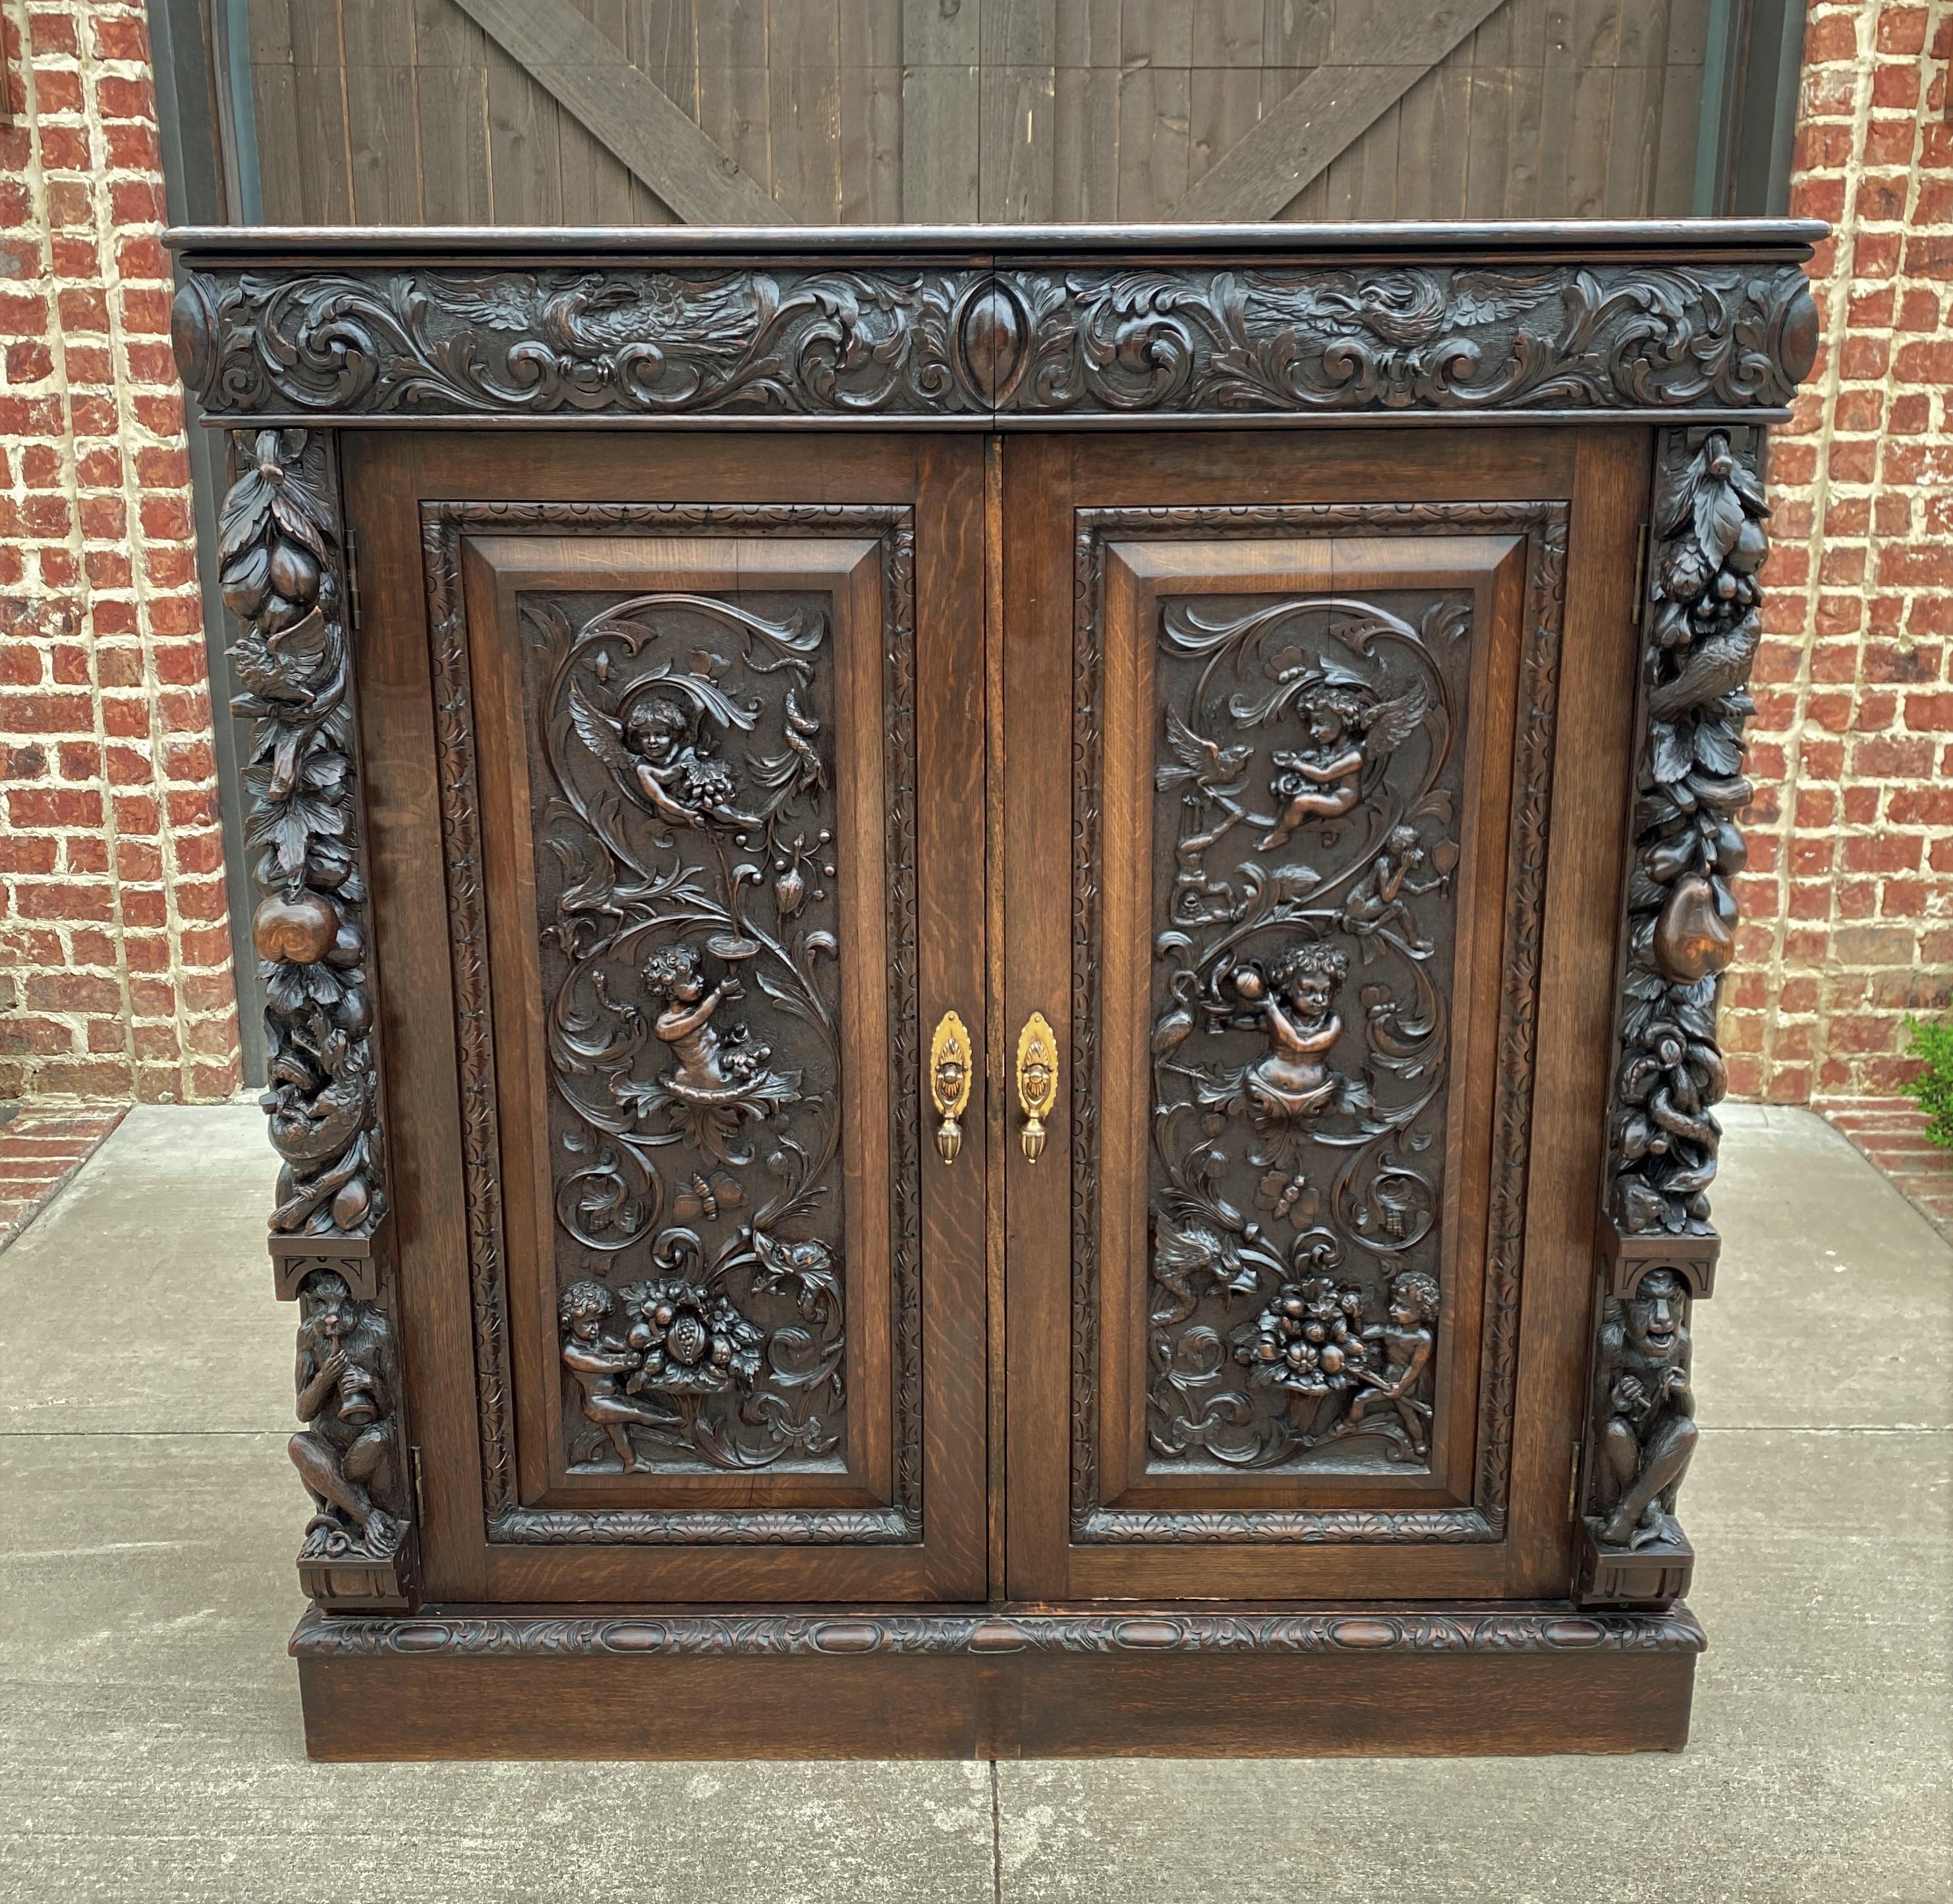 SUPERB Antique English GOTHIC REVIVAL Oak Cabinet, Chest, or Wardrobe~~ONE OF A KIND~~HIGHLY CARVED with 8 Interior Sliding Compartments ~~c. 
1880s 


 This is a MUST SEE! RARE STATEMENT PIECE~~19th century English oak cabinet with exquisitely